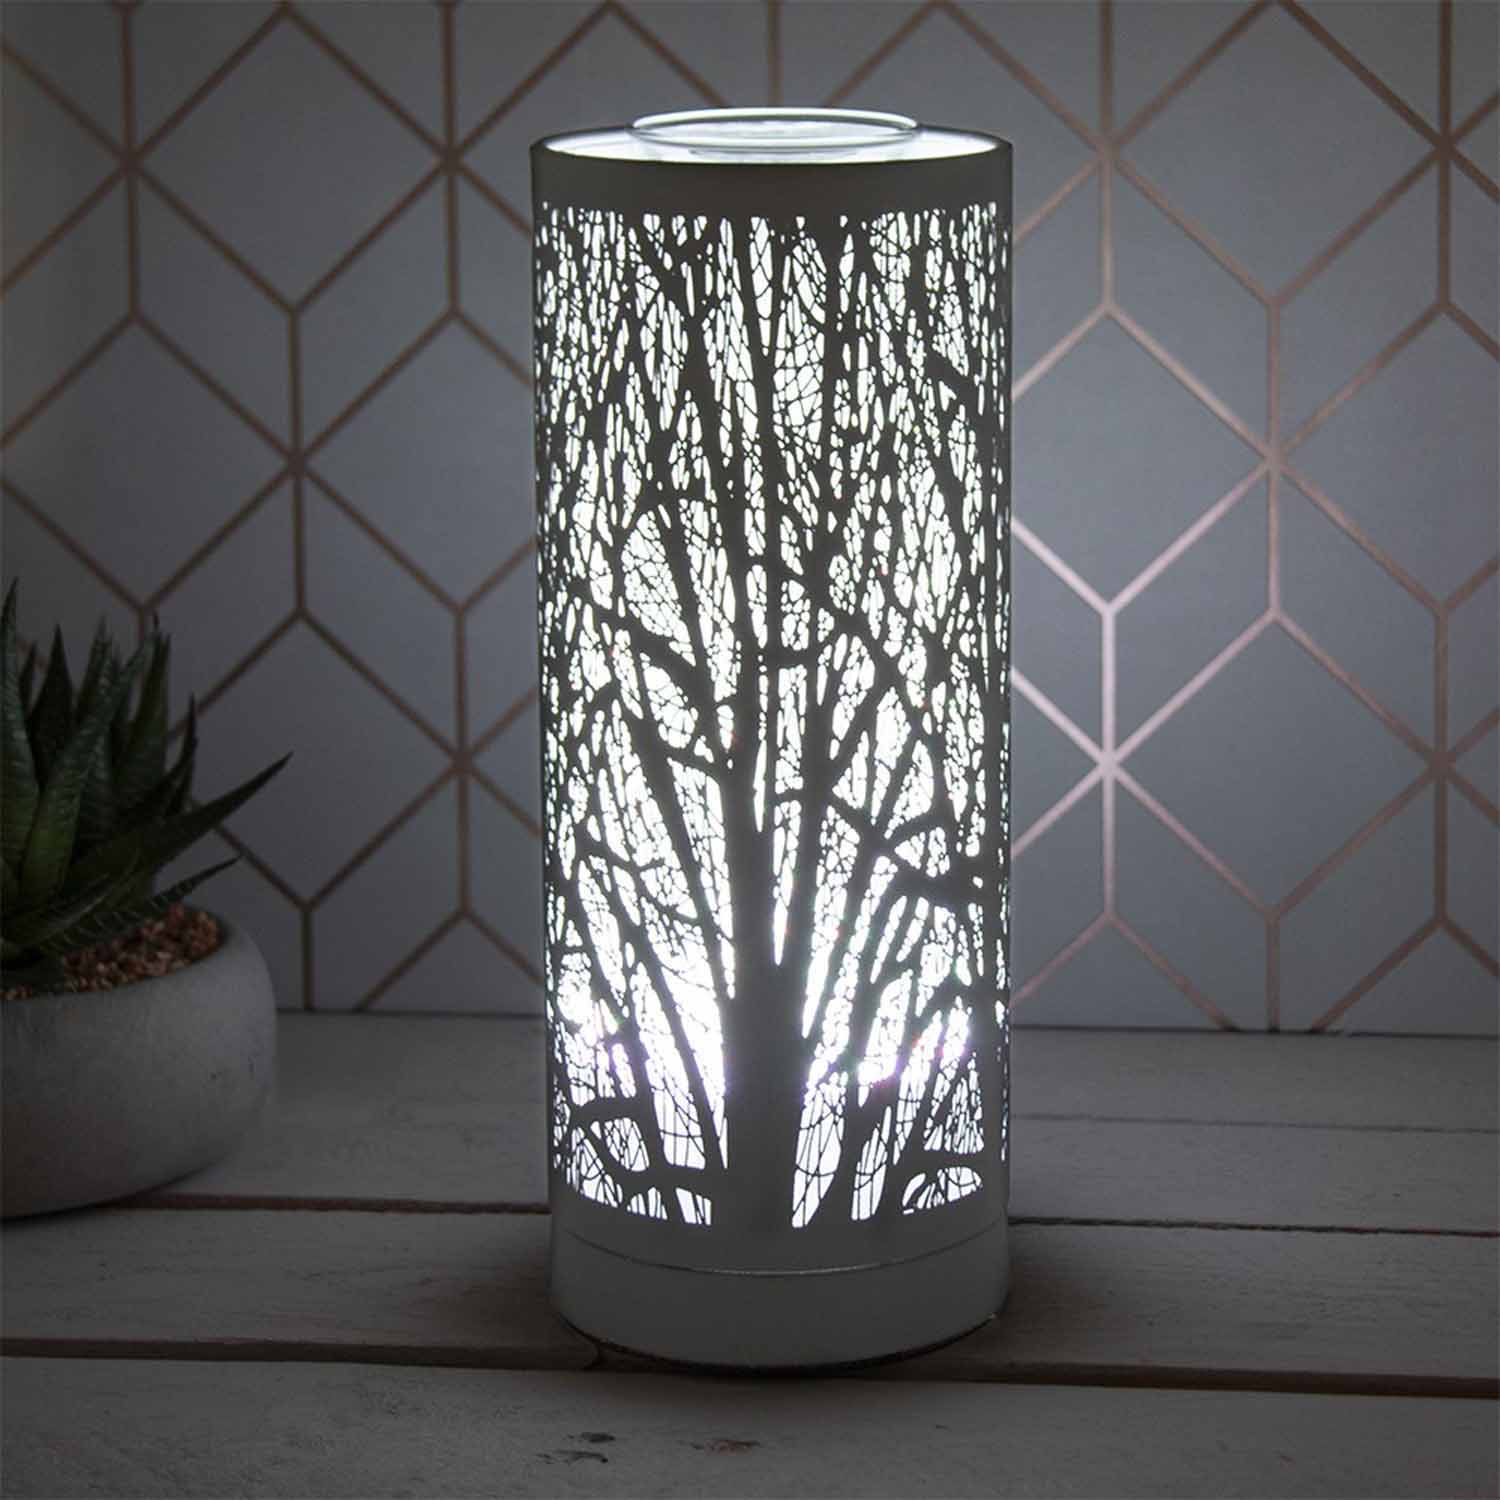 The Home Collection LED Colour Changing Aroma Lamp - Grey 1 Shaws Department Stores